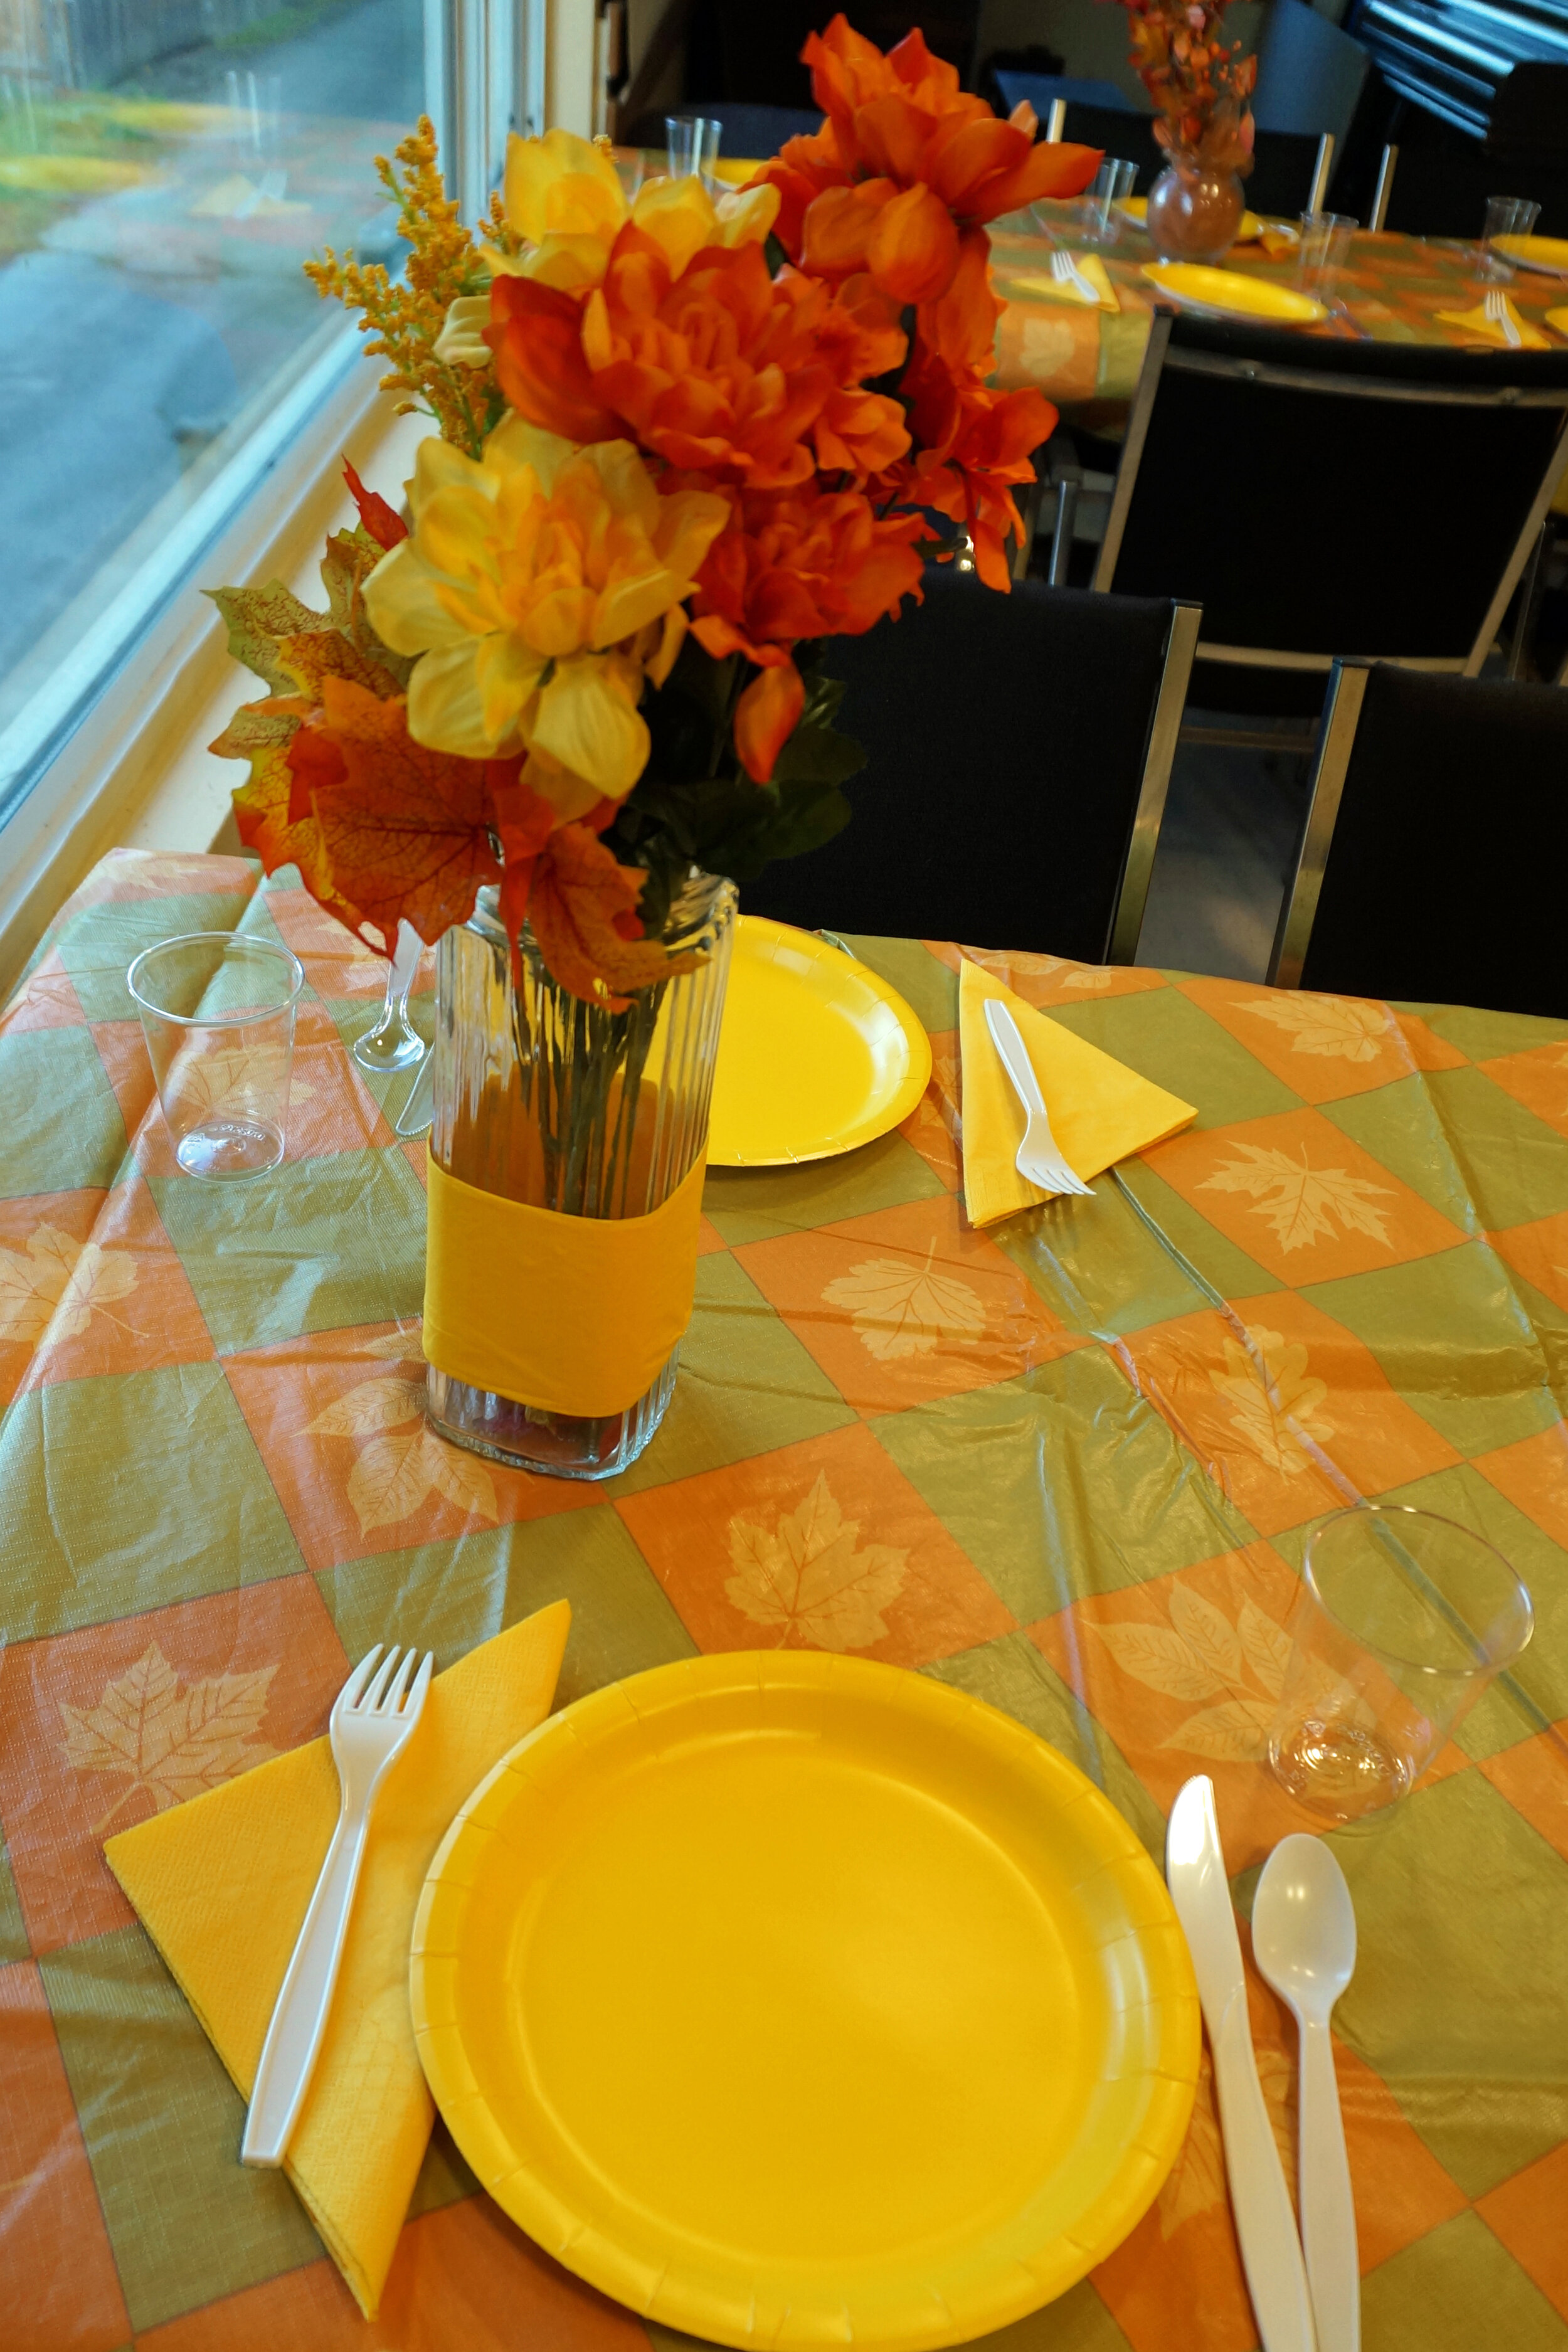 Copy of Thanksgiving place setting.jpg